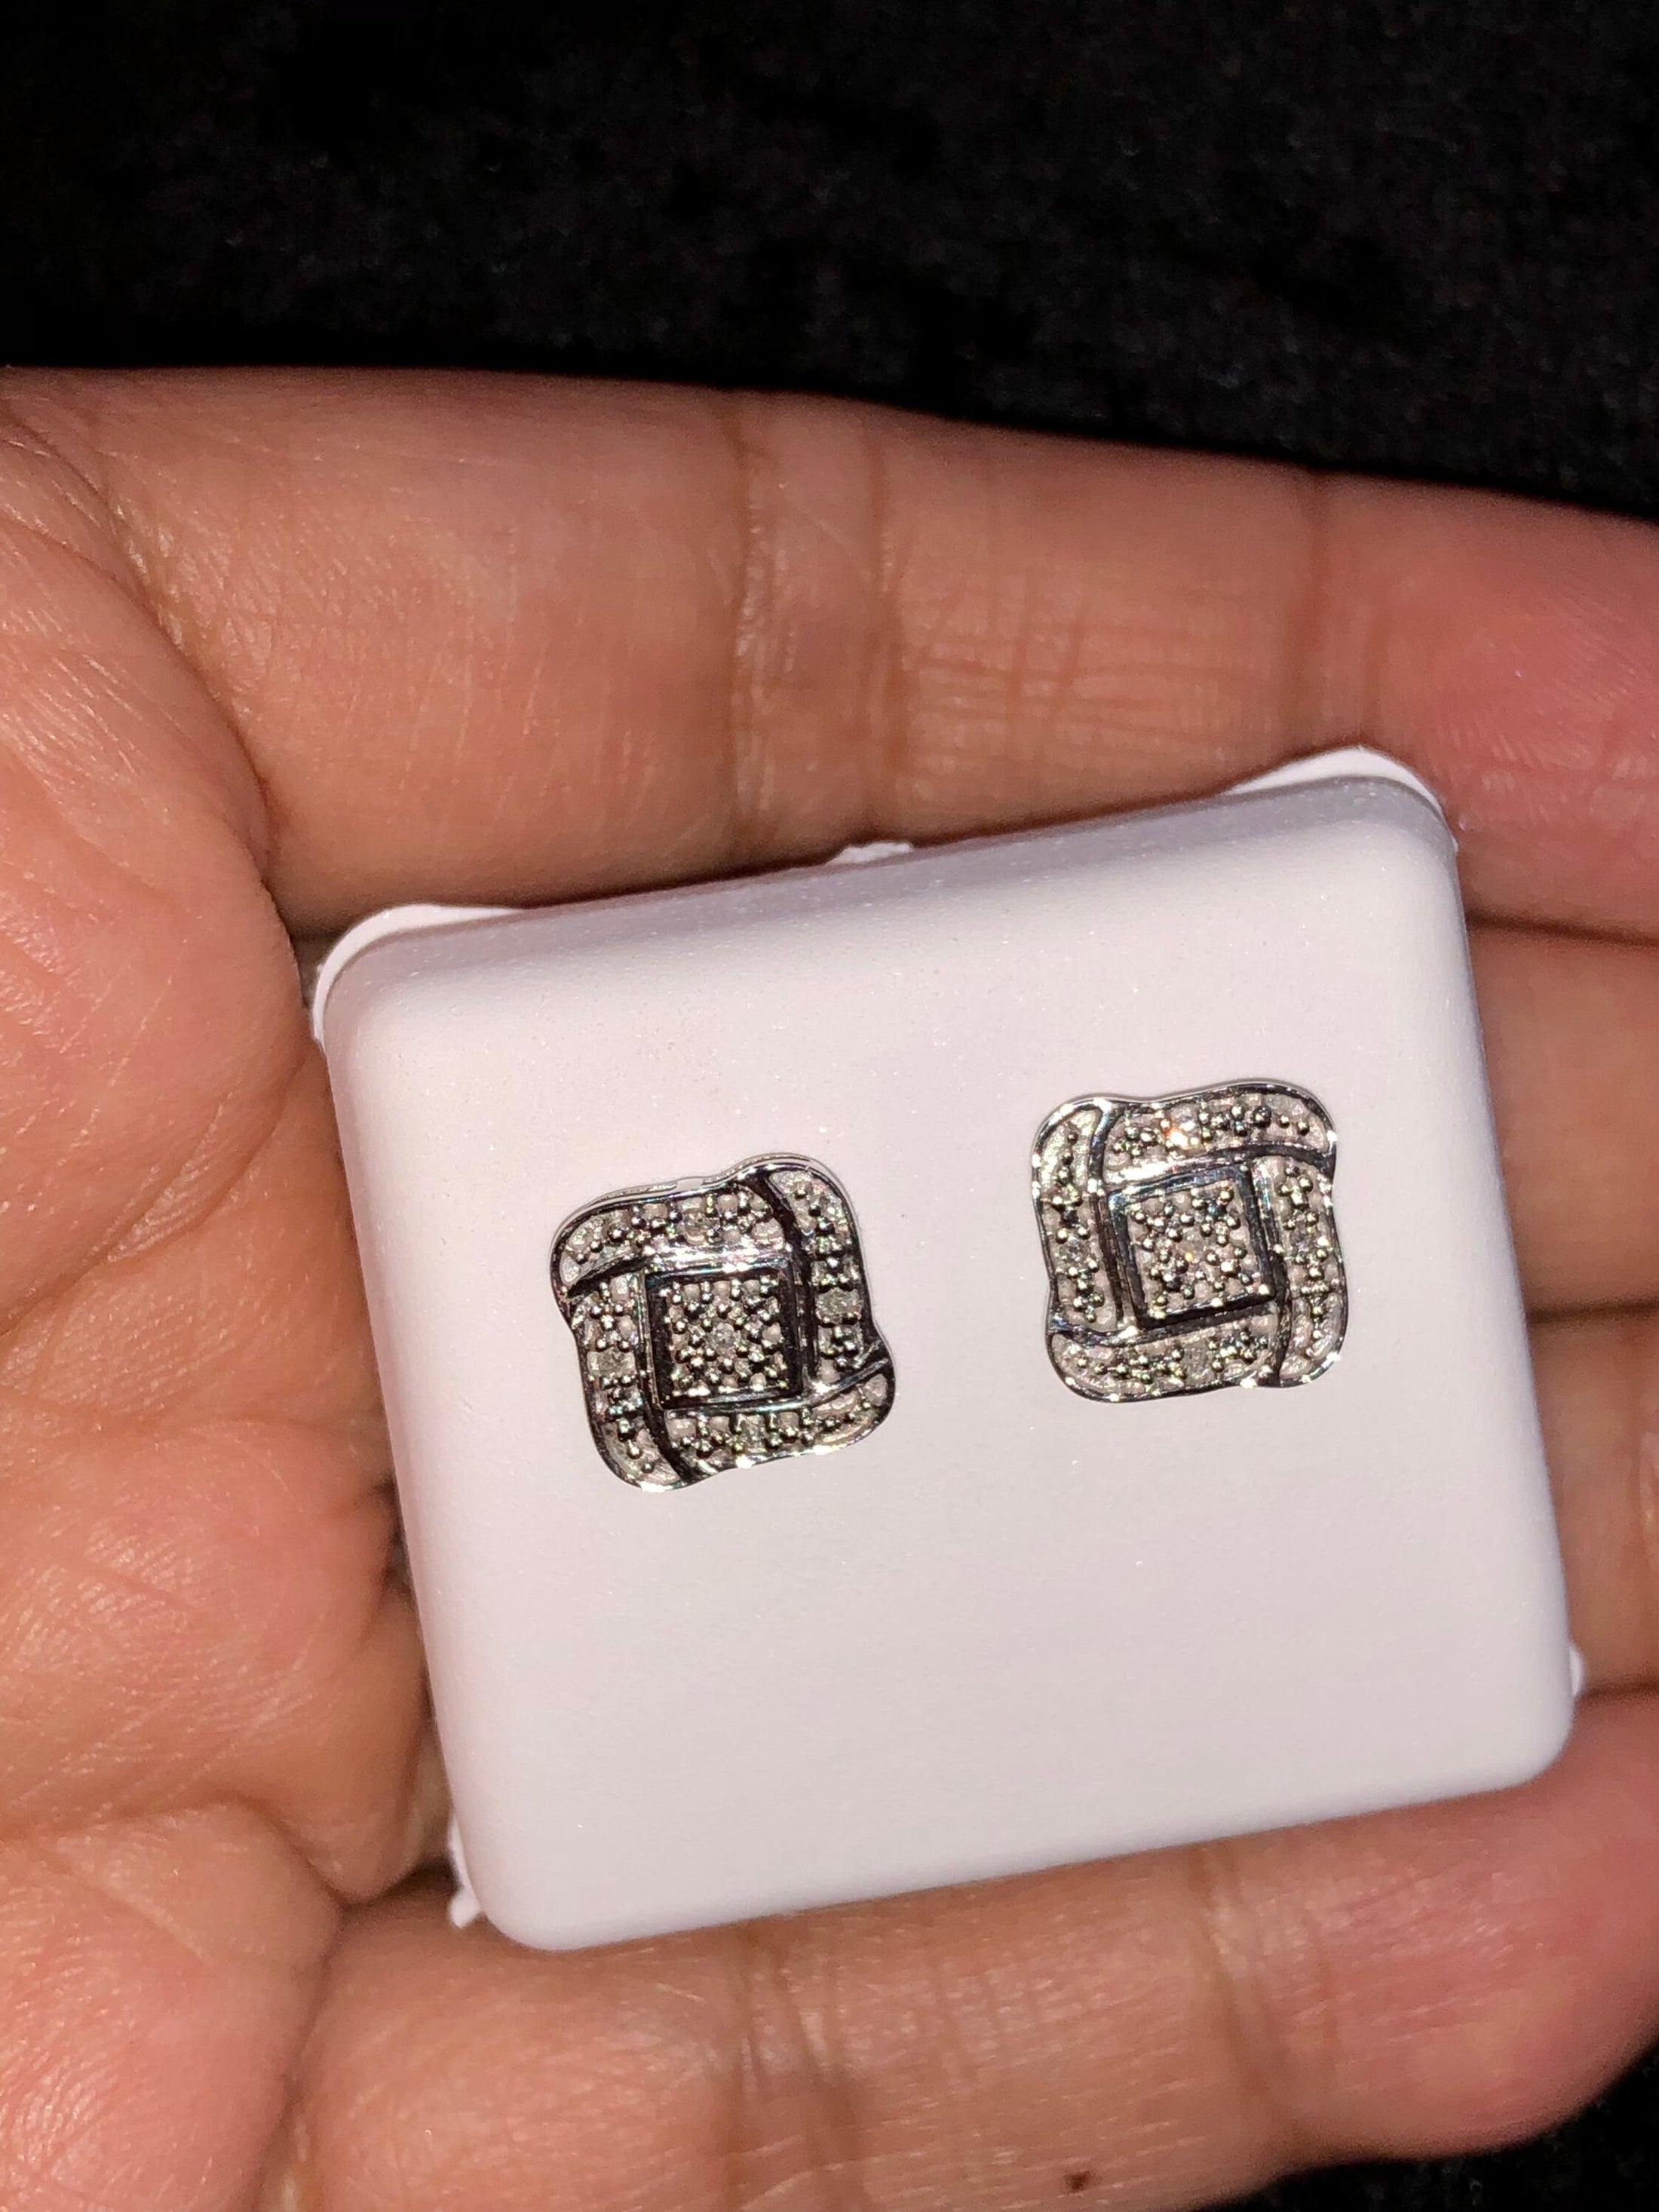 Must have Real Diamond Square Earrings. Not CZ not moissanite 100% natural real diamonds. Certificate of authenticity included. Huge Sale!